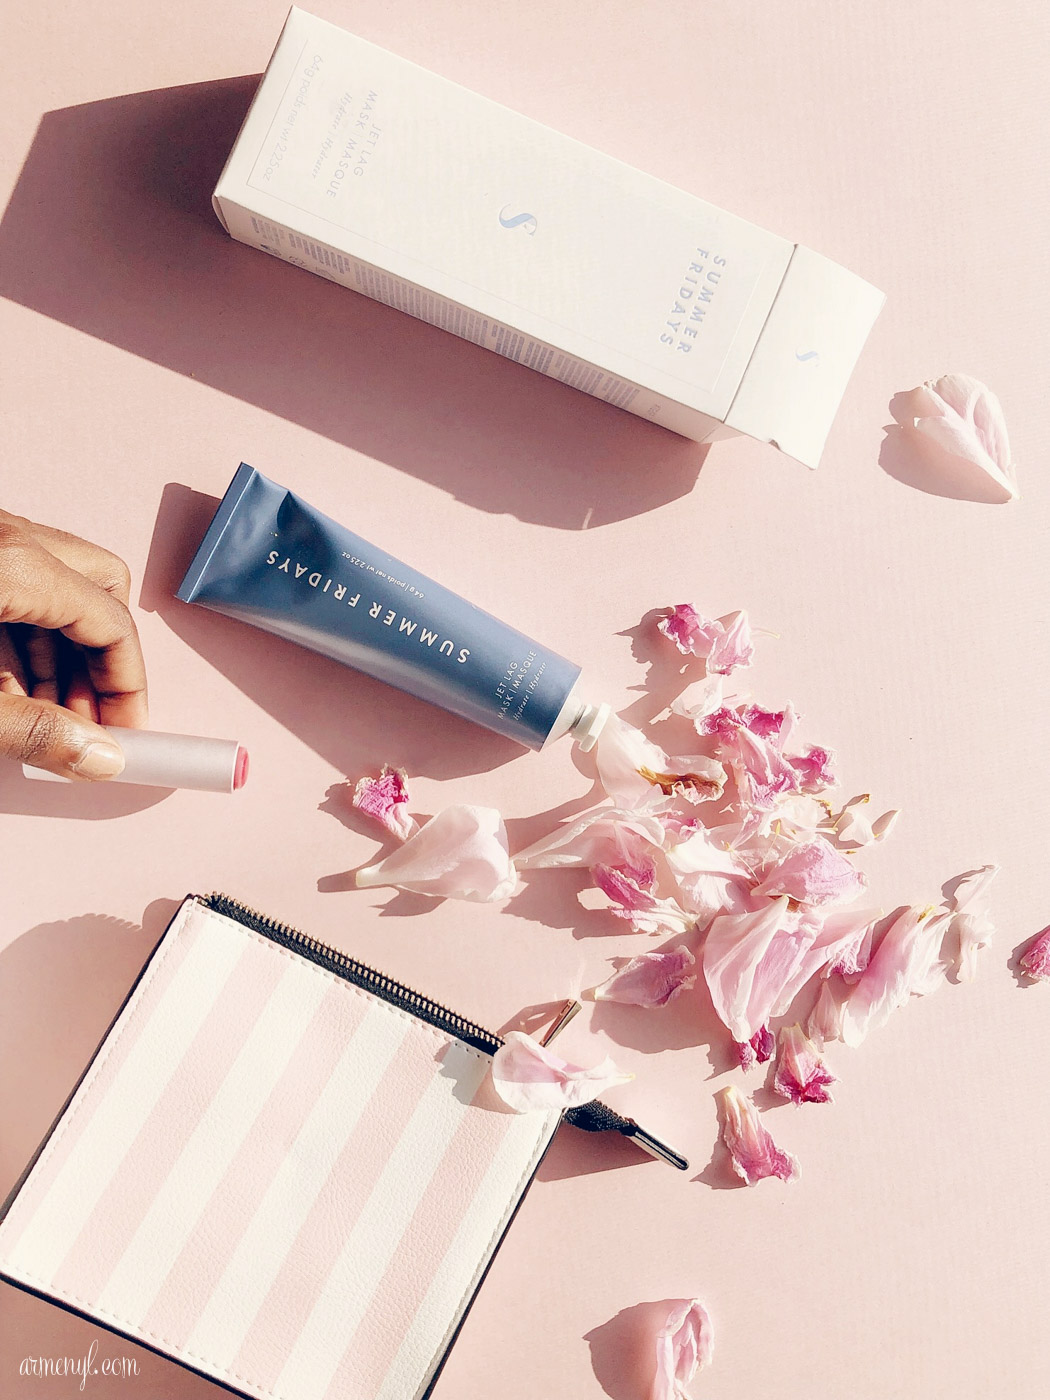 Beauty Review: Summer Friday jet lag mask review. Art Direction and photography by Armenyl